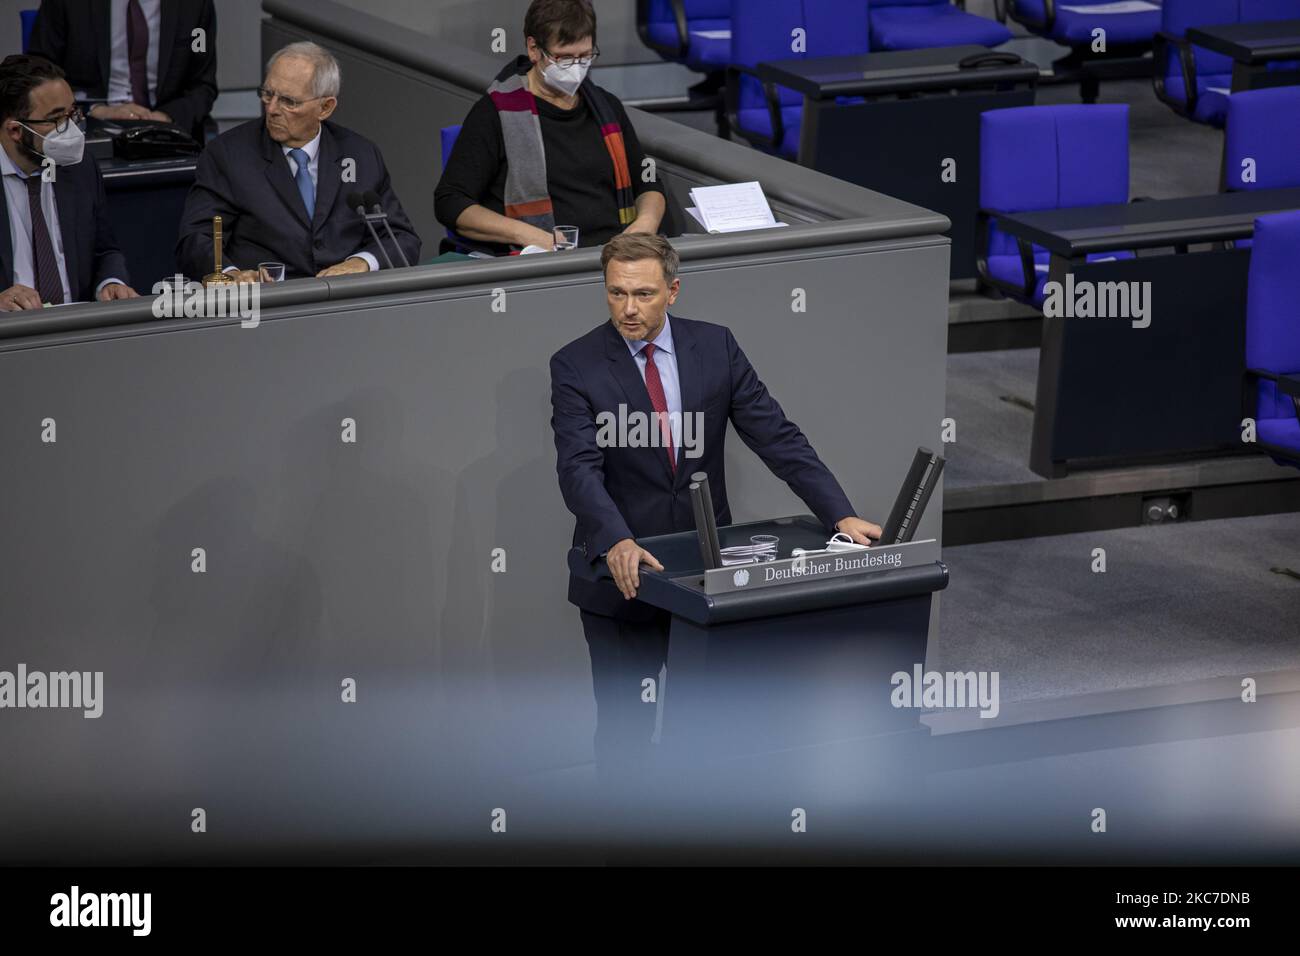 Christian Lindner, Wolfgang Schäuble attends the 203th Summit of the German Parliament, in Berlin, Germany, on January 13, 2021. (Photo by Achille Abboud/NurPhoto) Stock Photo